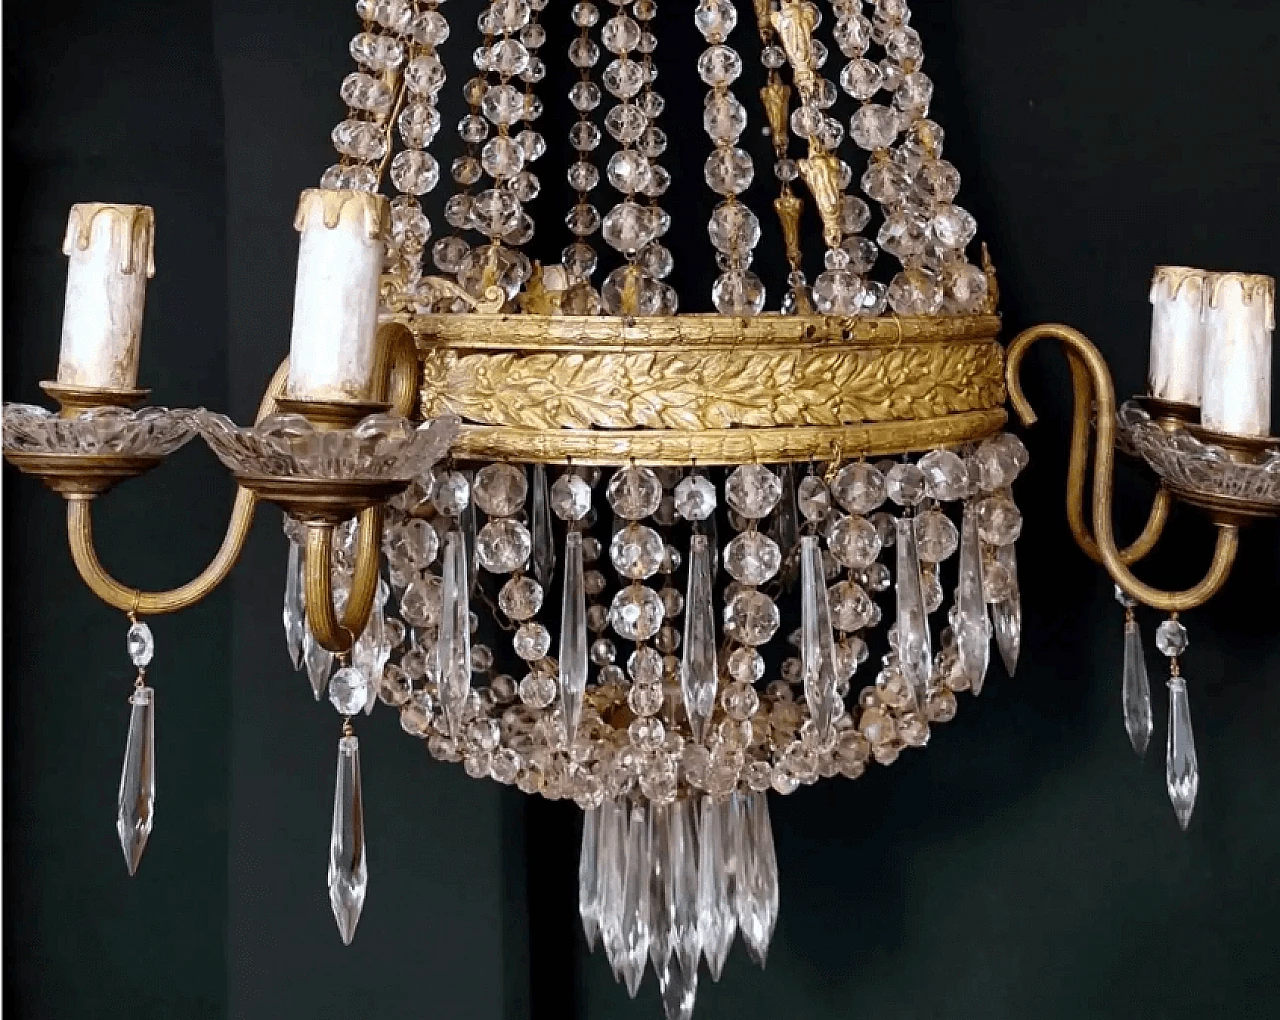 Louis XVI-style hot air balloon chandelier made of lead crystal and gilded brass, 17th century 6